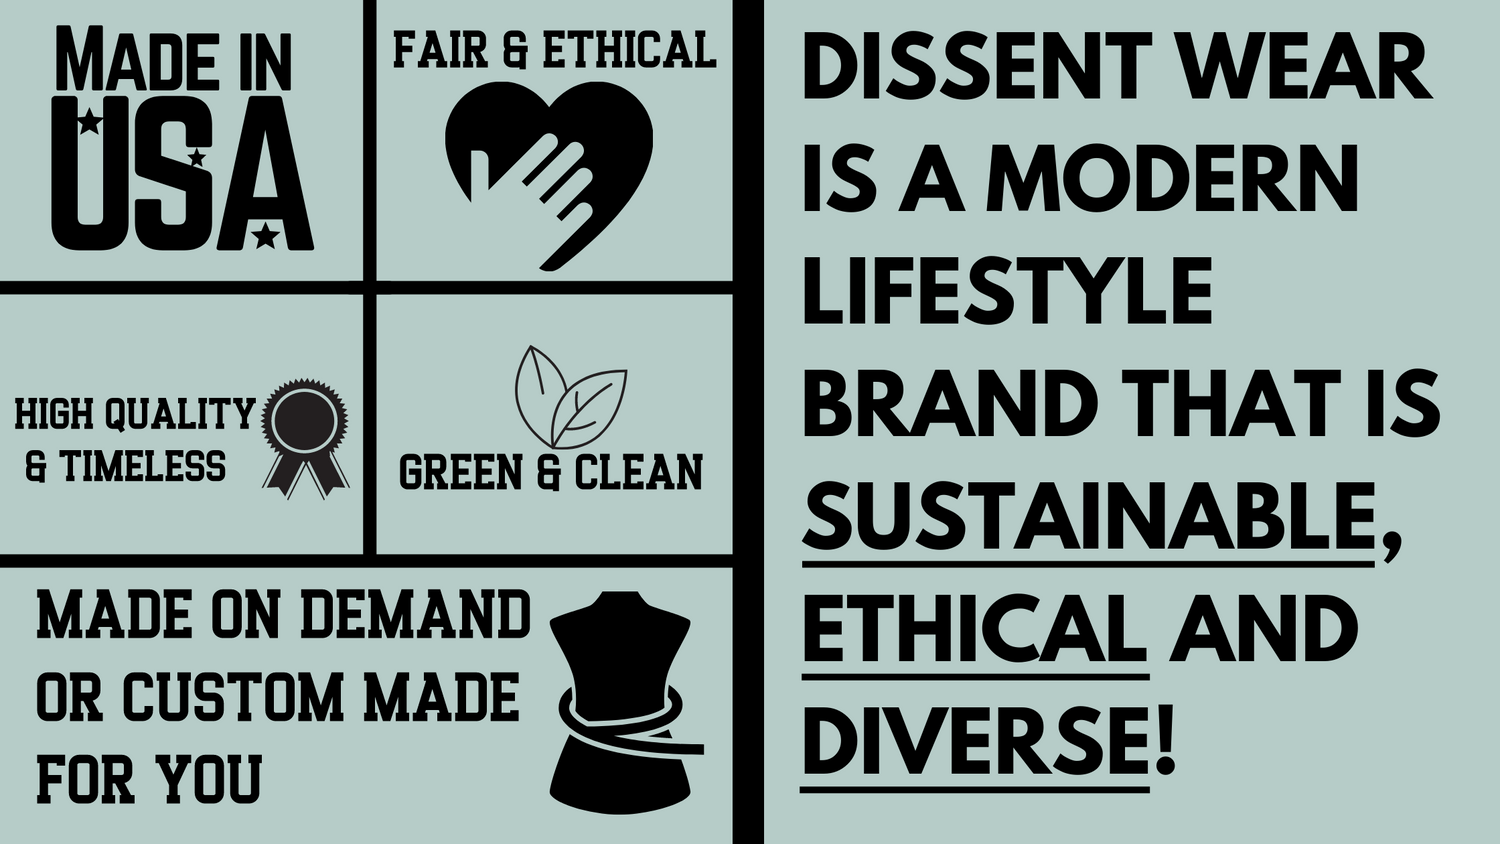 WHAT IS A SUSTAINABLE FASHION BRAND AND WHY IS IT IMPORTANT?